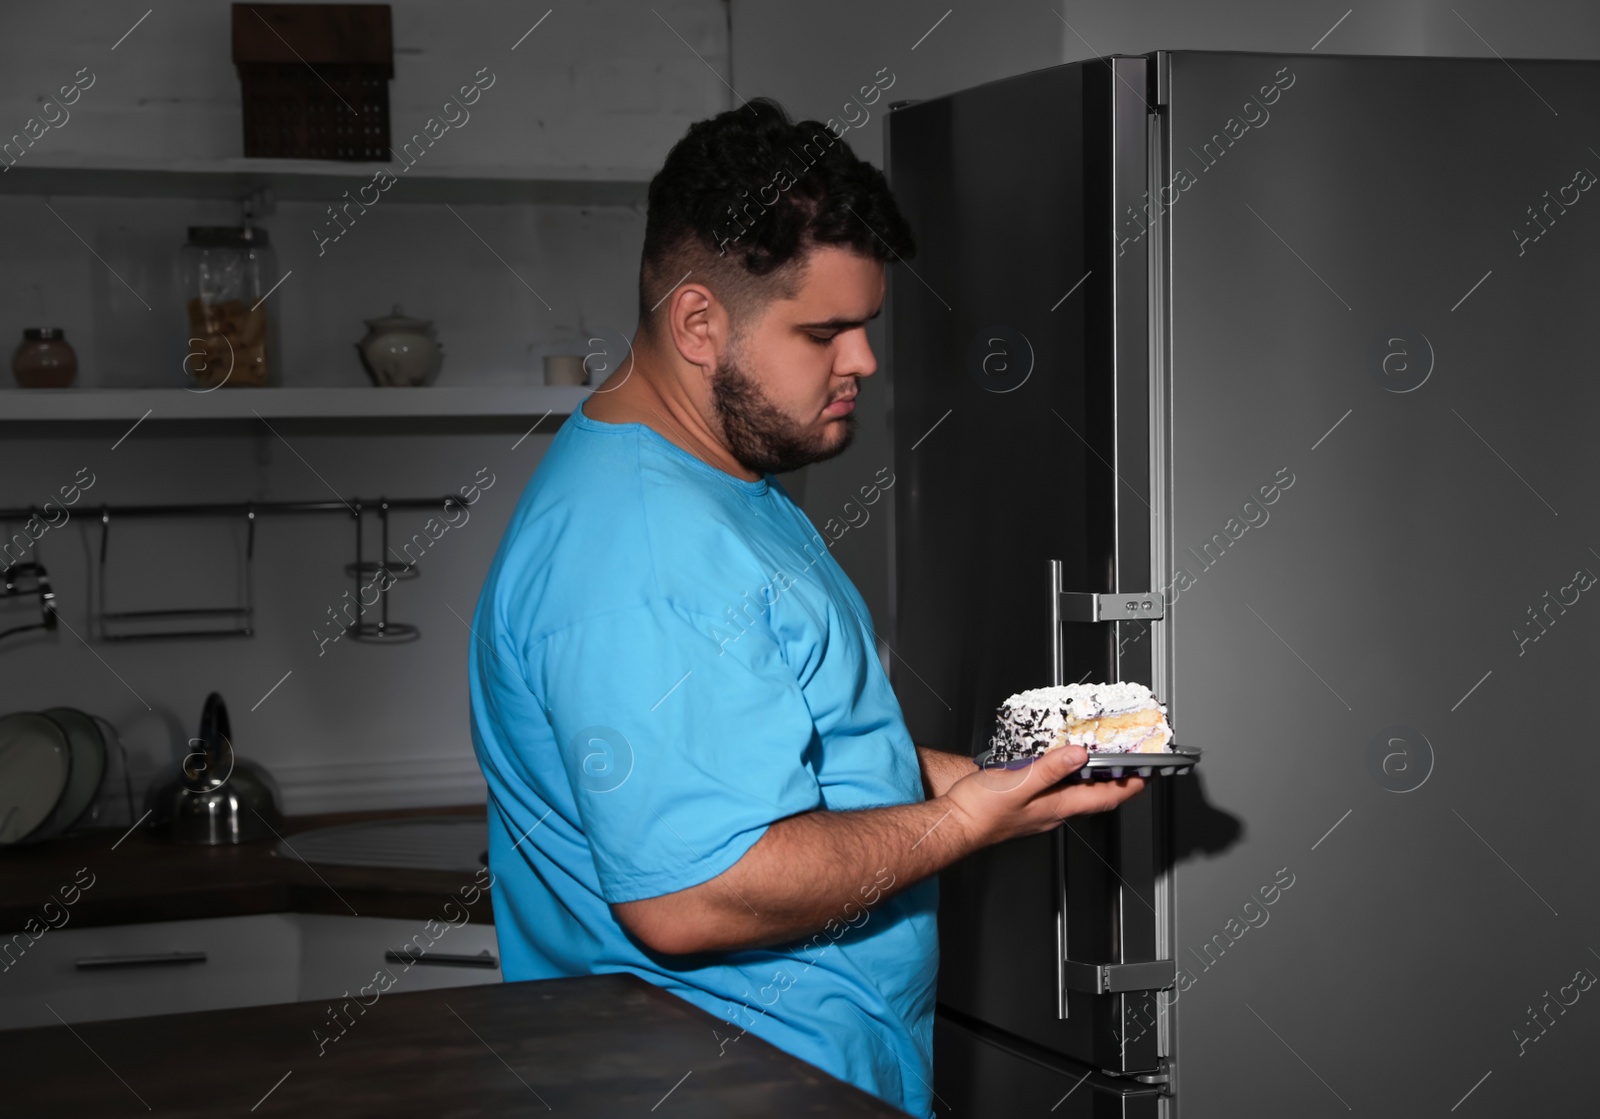 Photo of Depressed overweight man taking cake out of refrigerator at night